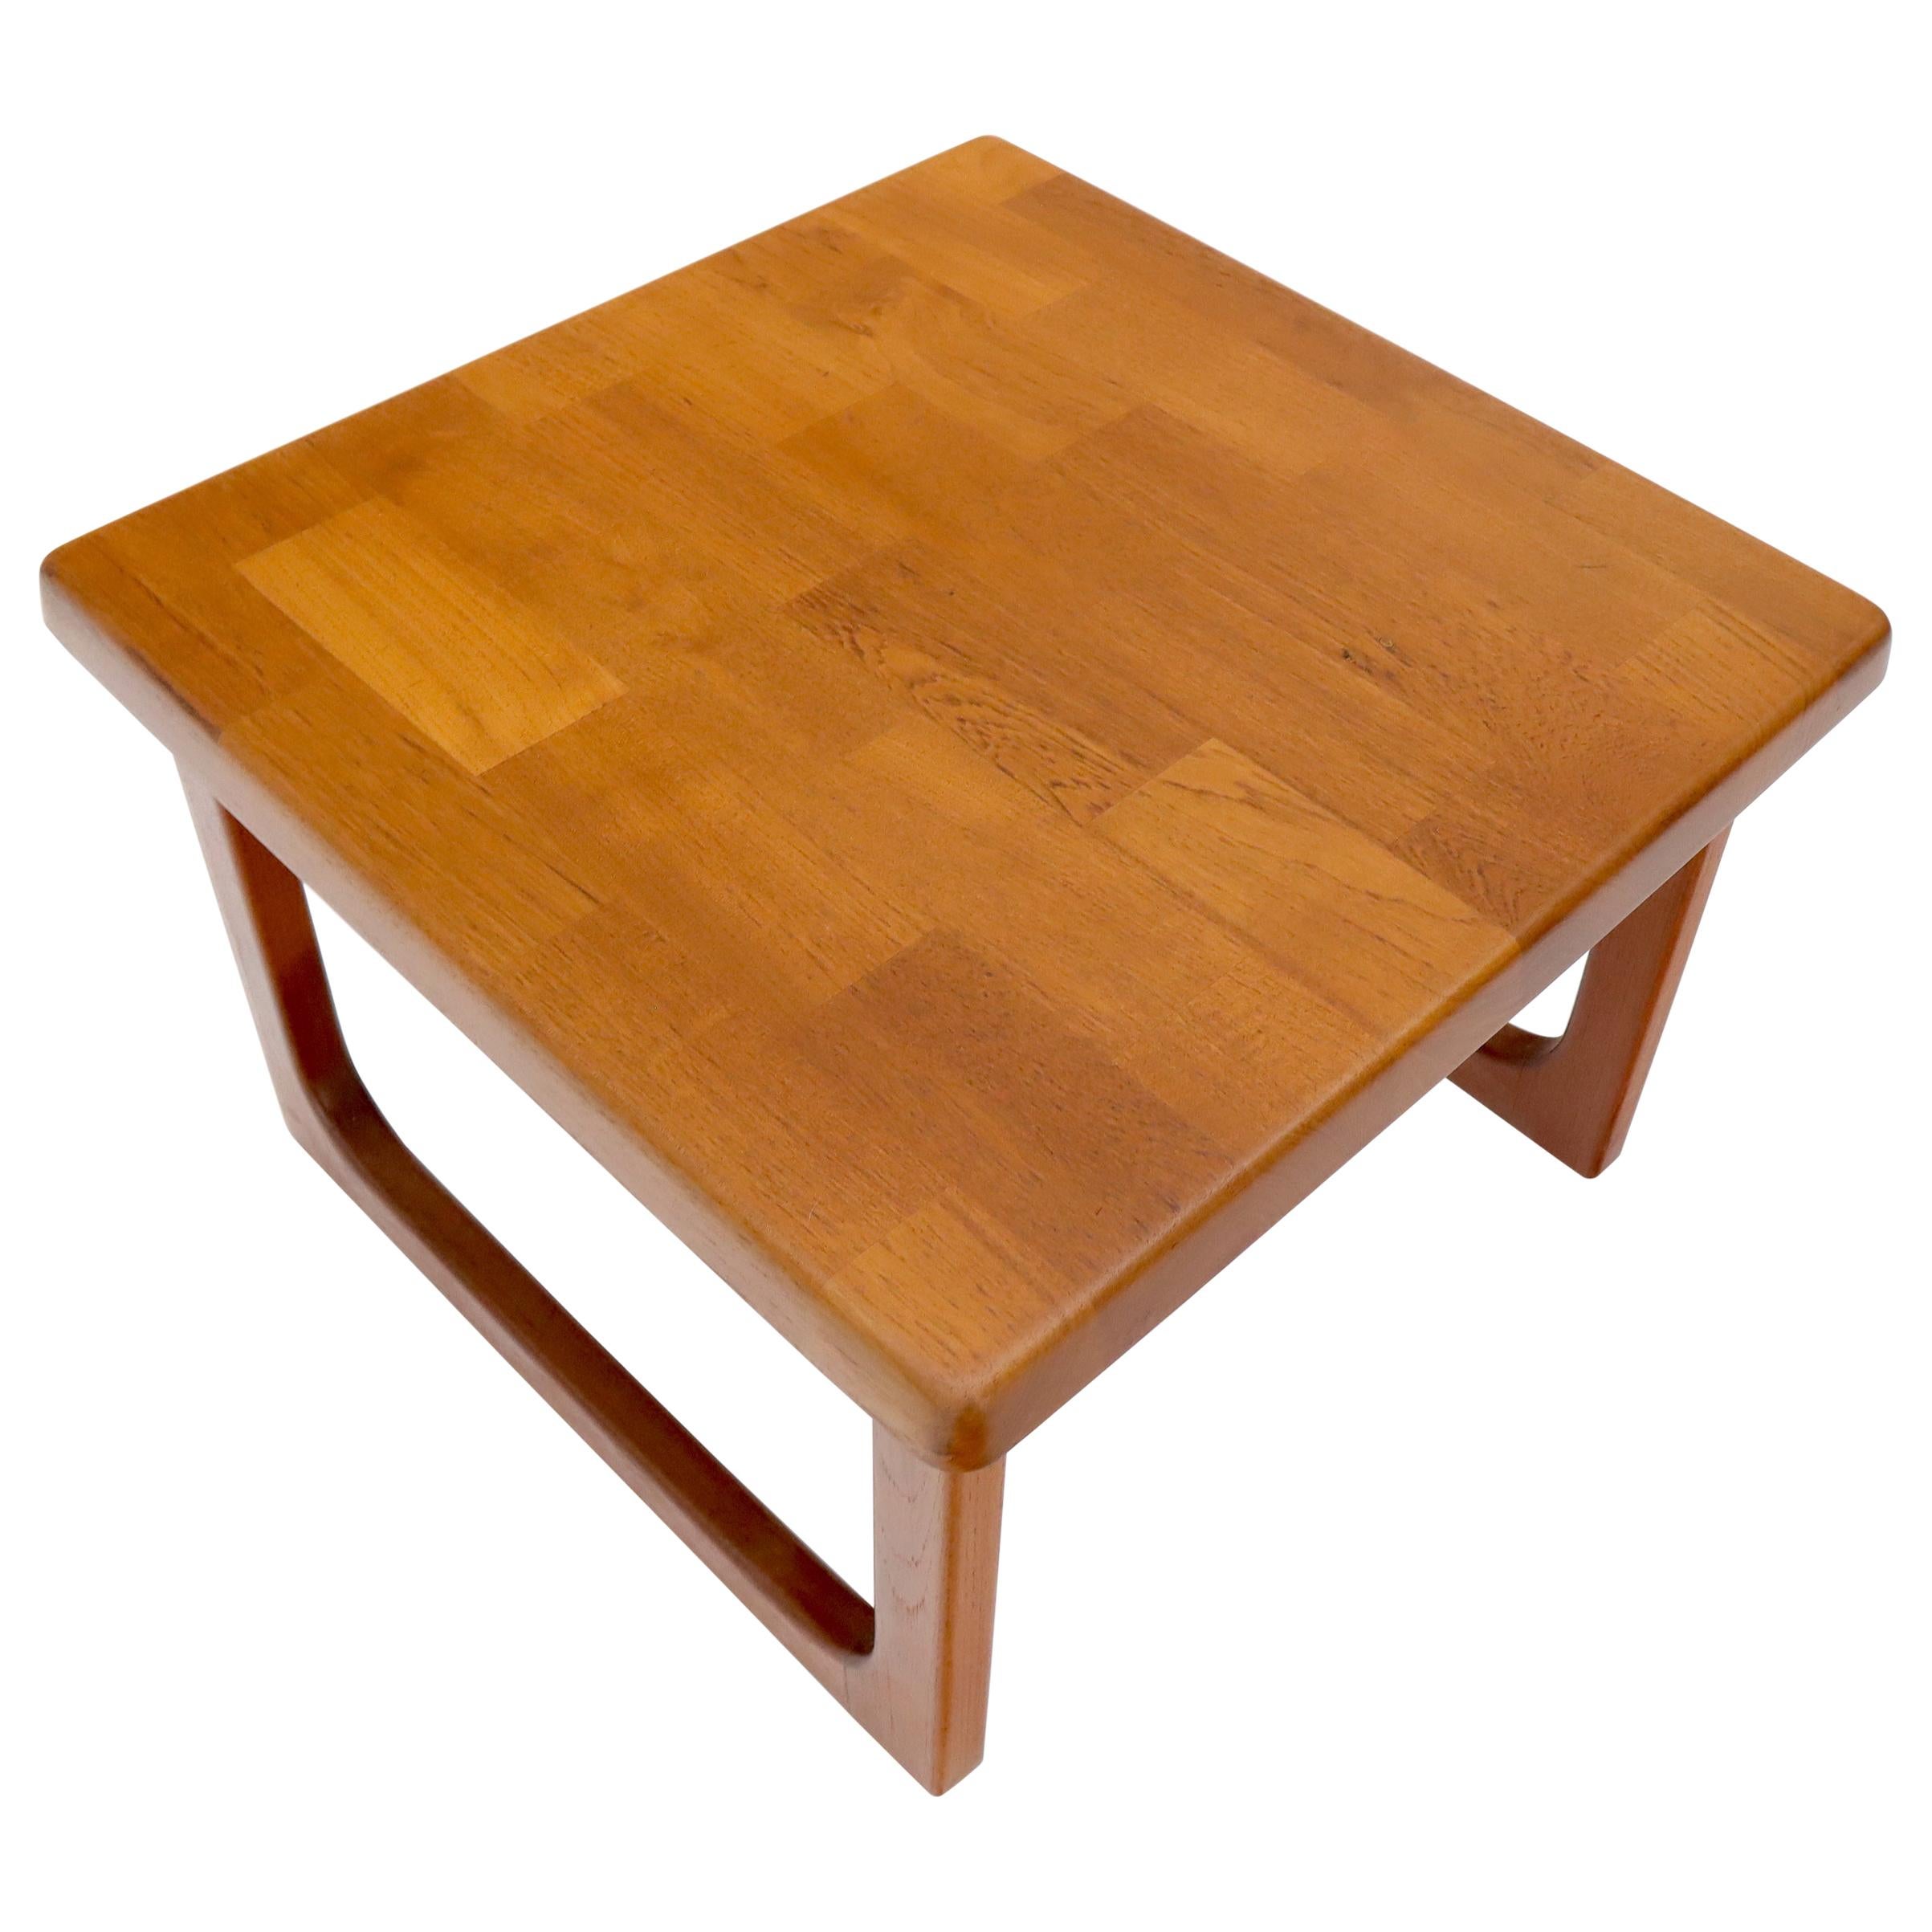 Danish Mid-Century Modern Solid Thick Teak Top Square Coffee Side Table